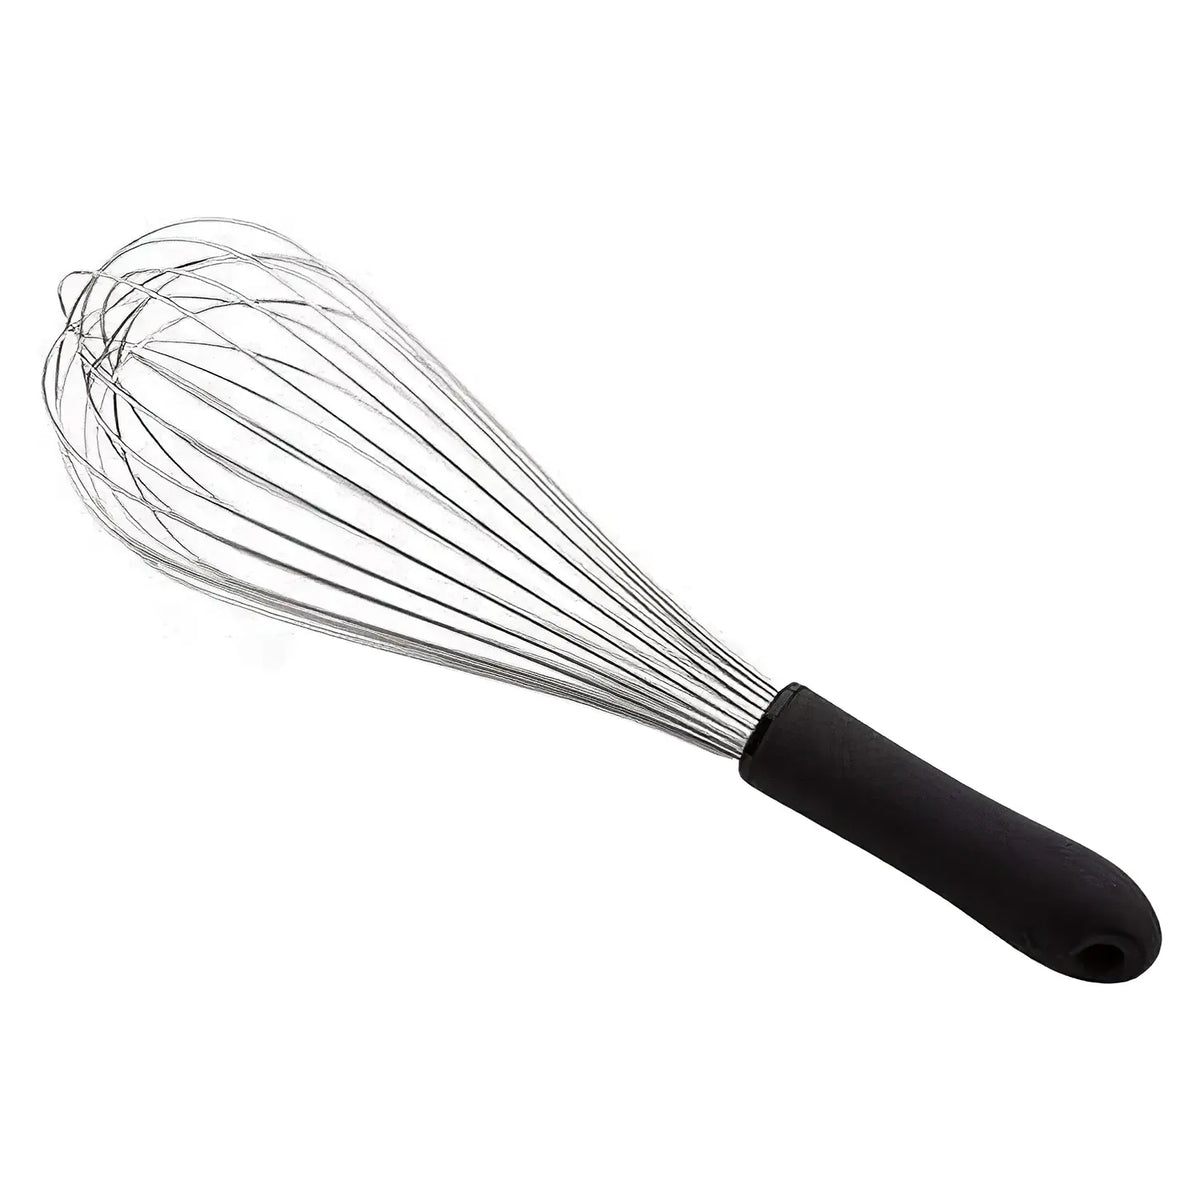 baking stone set, 13 rd w rack and cutter - Whisk